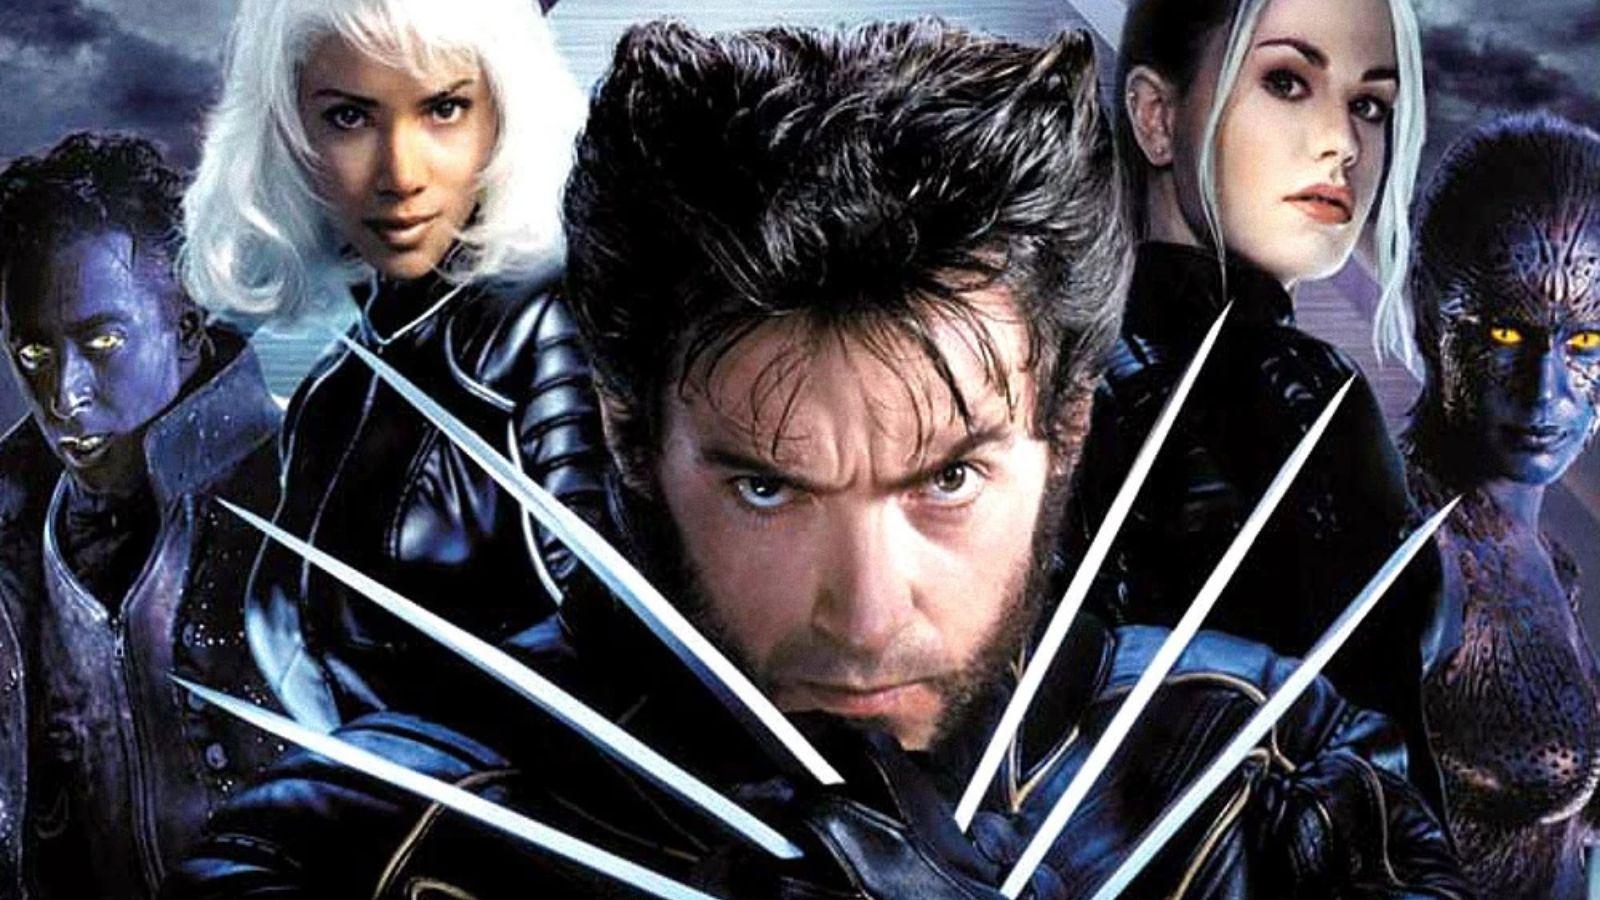 Hugh Jackman, Halle Berry, and Anna Paquin in X2.